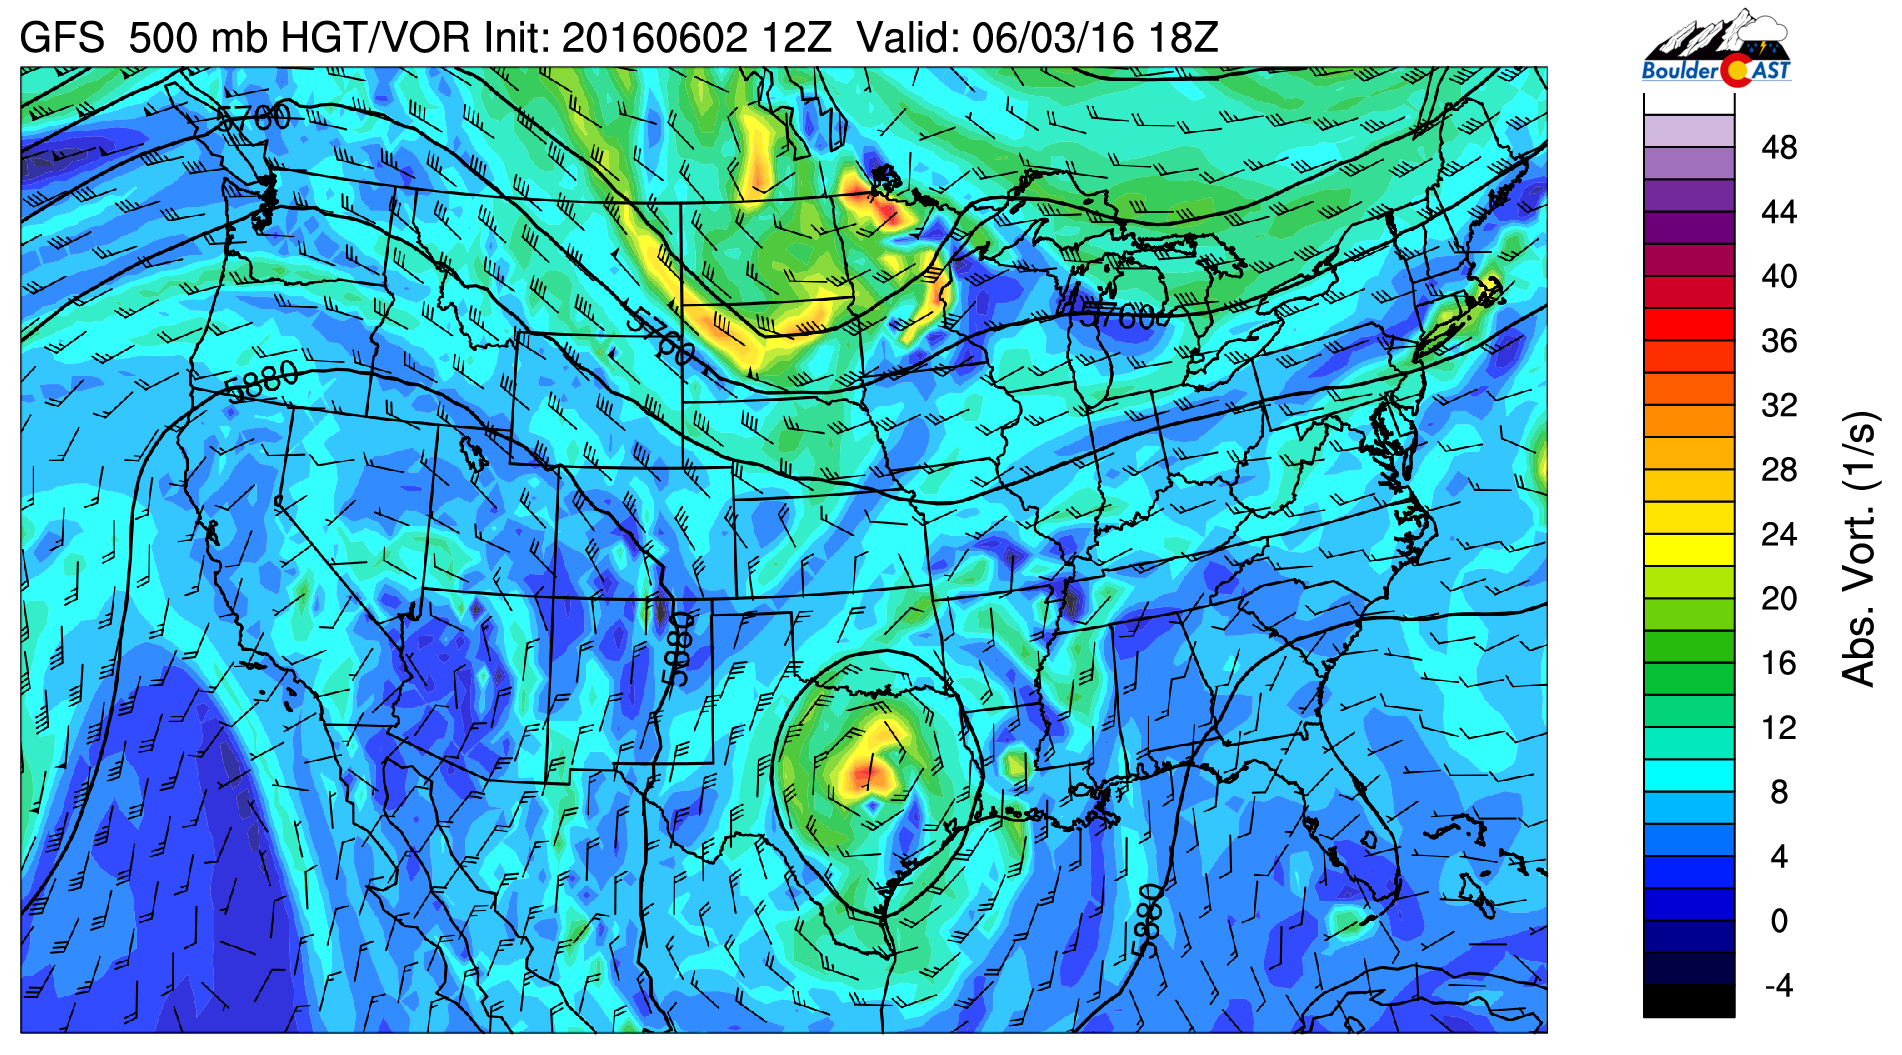 GFS 500 mb vorticity for today